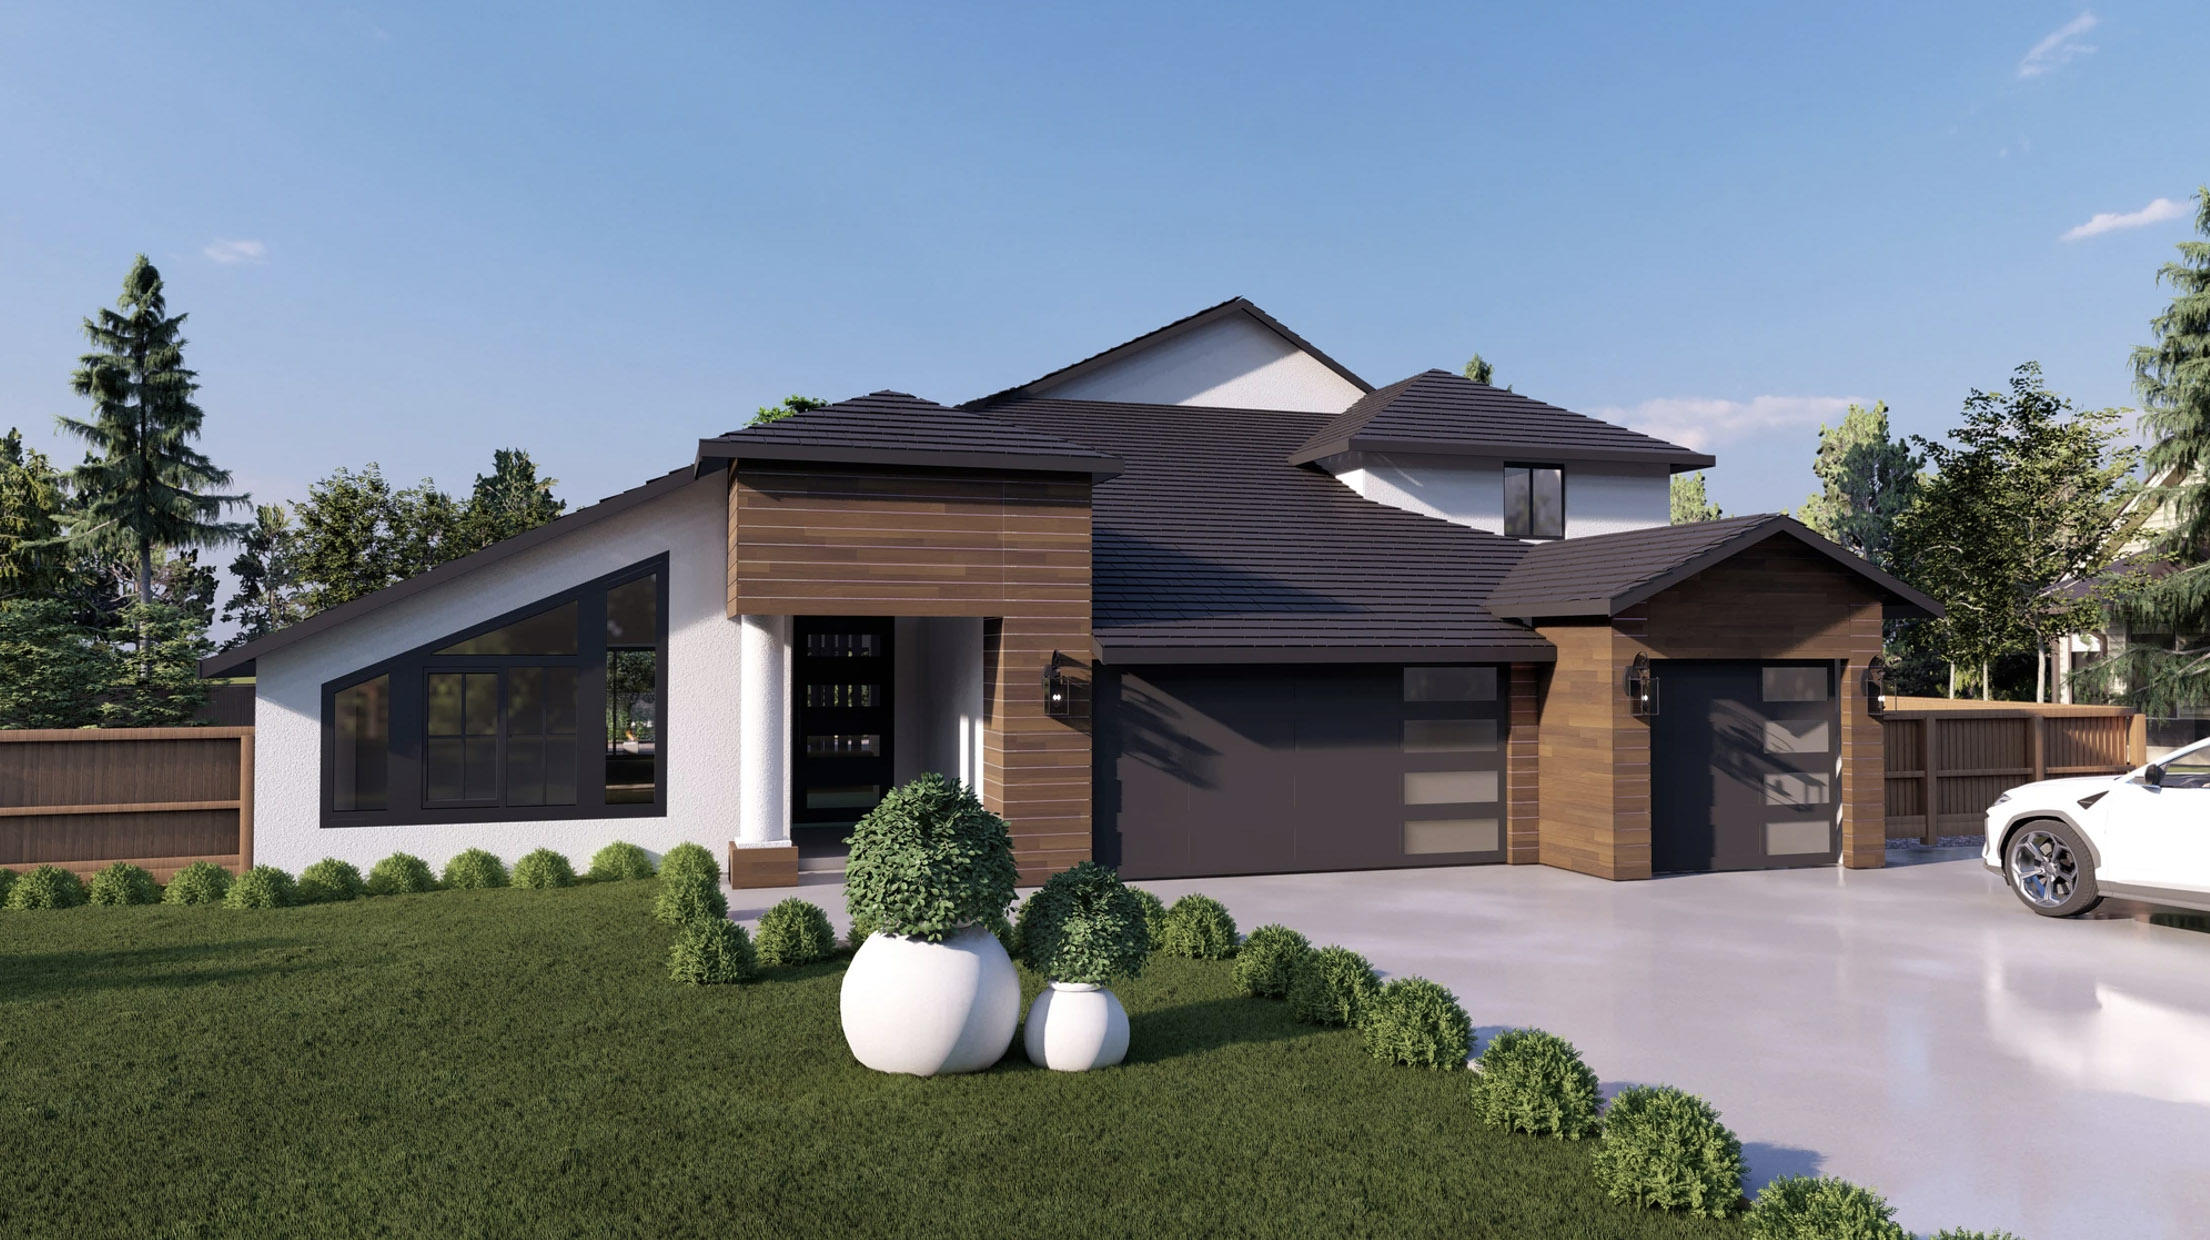 New Home Construction in Orange County California by Concept Design Group